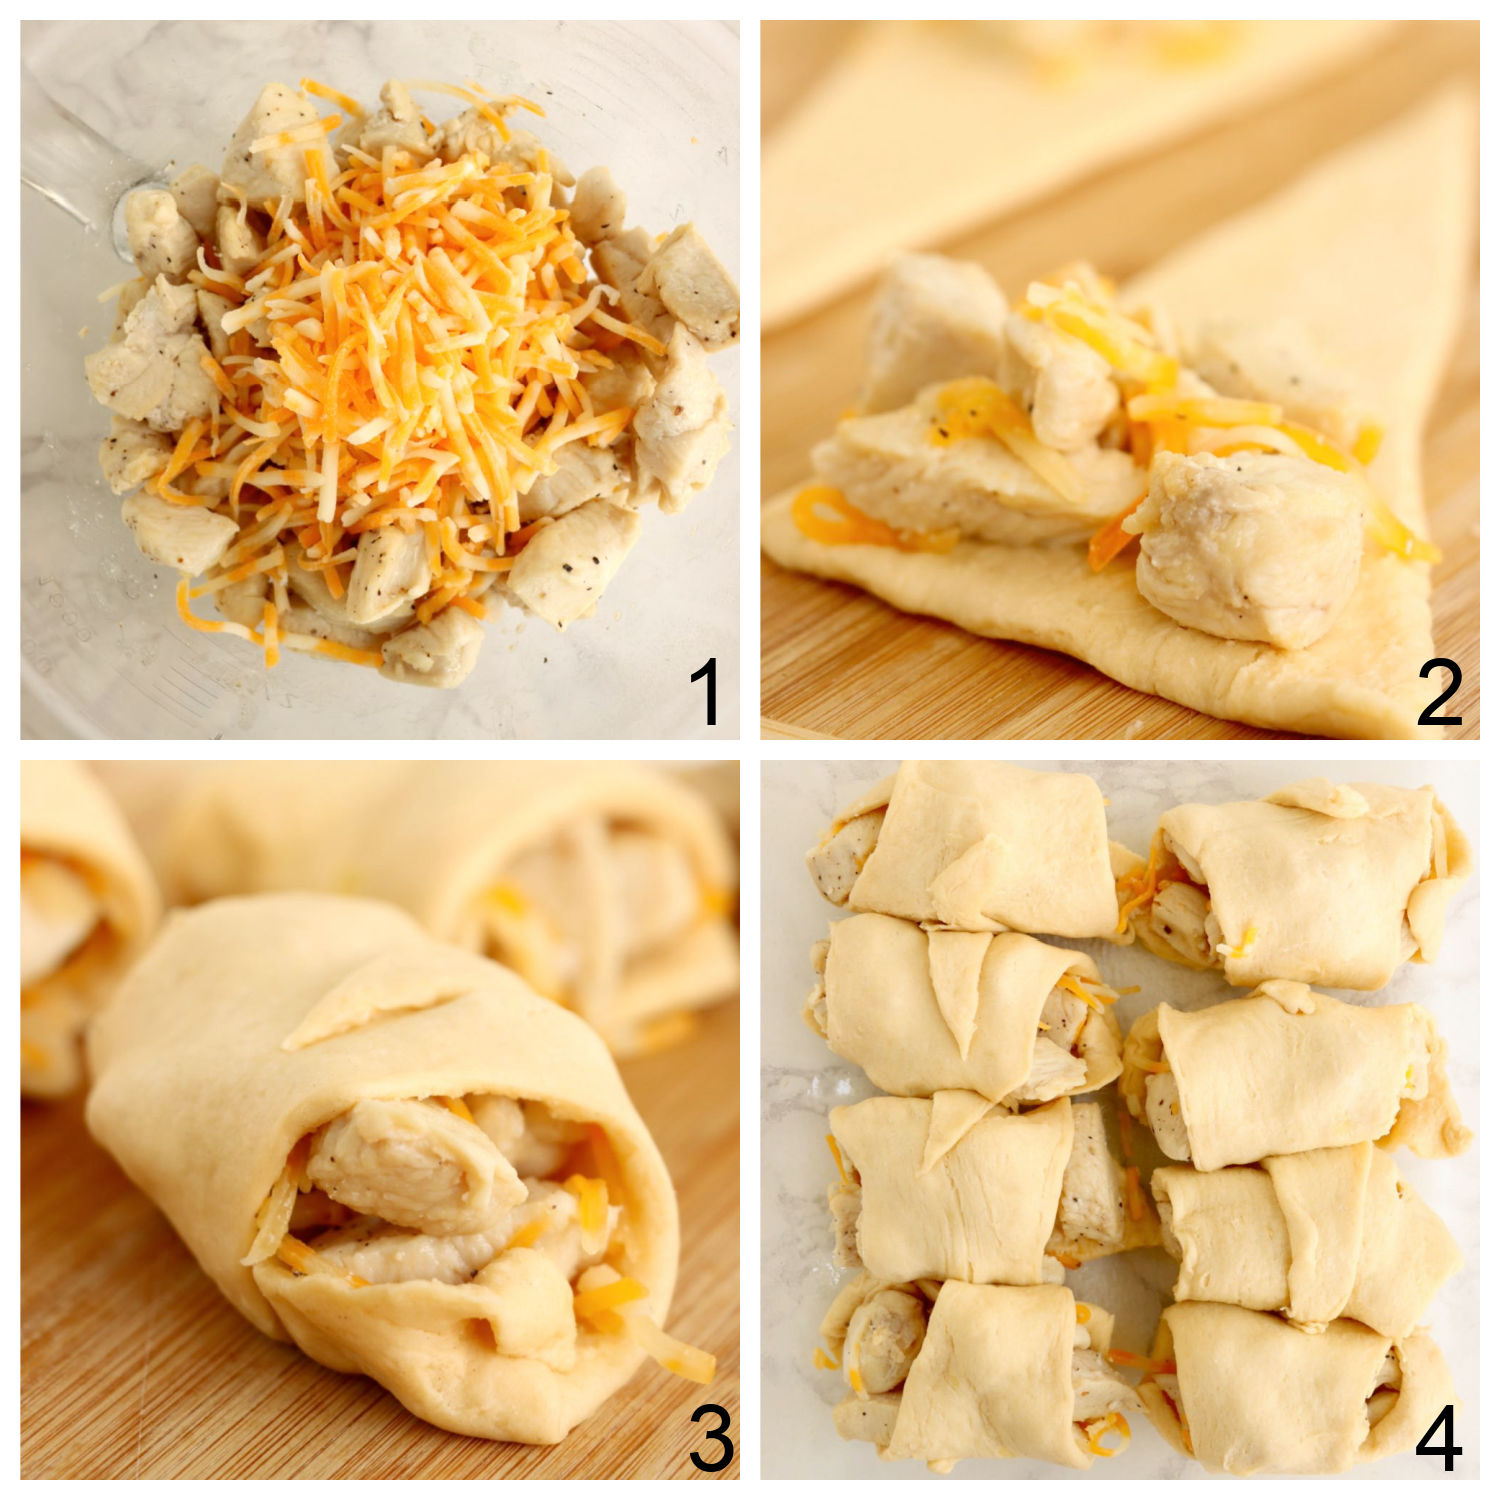 Steps for wrapping chicken in crescent rolls